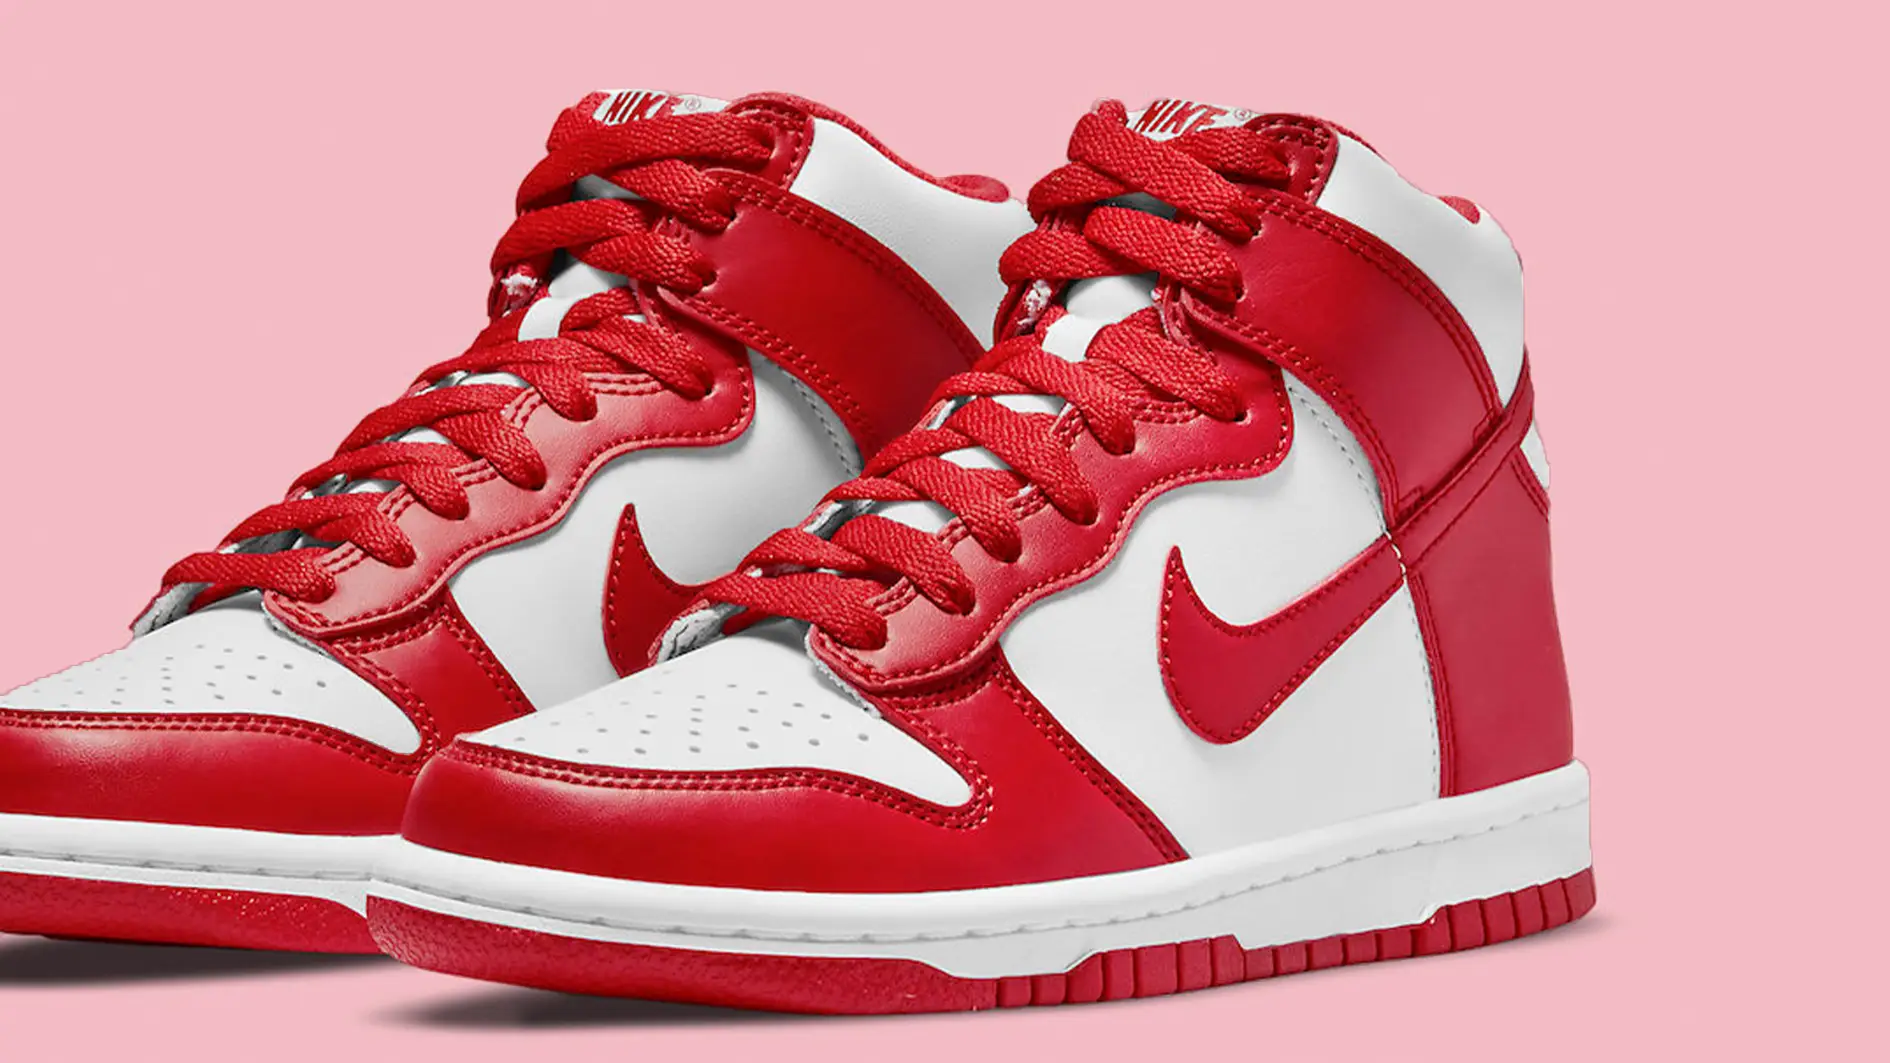 The Nike Dunk High is Returning in the OG 'University Red' Colourway ...